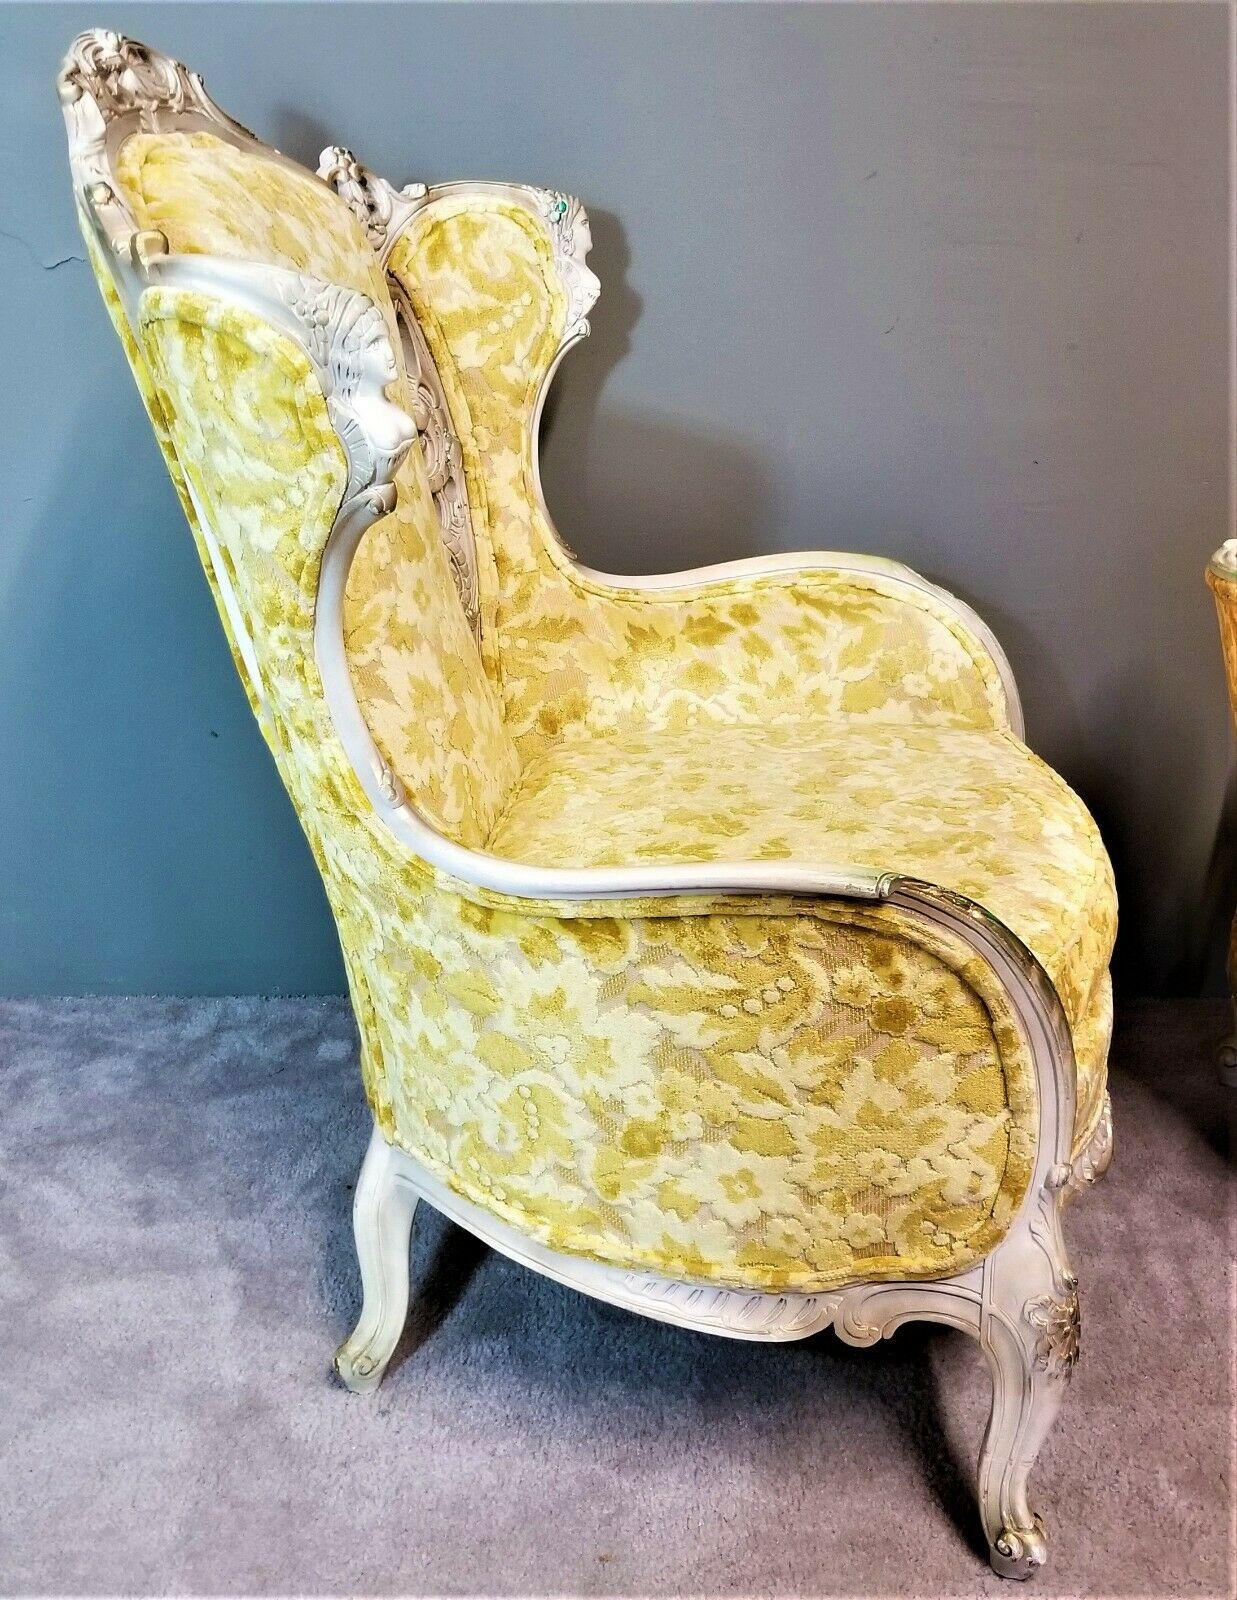 Offering One Of Our Recent Palm Beach Estate Fine Furniture Acquisitions Of A Spectacular Antique French Louis XV Rococo Hand Carved Burnout Velvet Wing Back Chair

We also have the matching sofa in Orange velvet listed separately.

Featuring